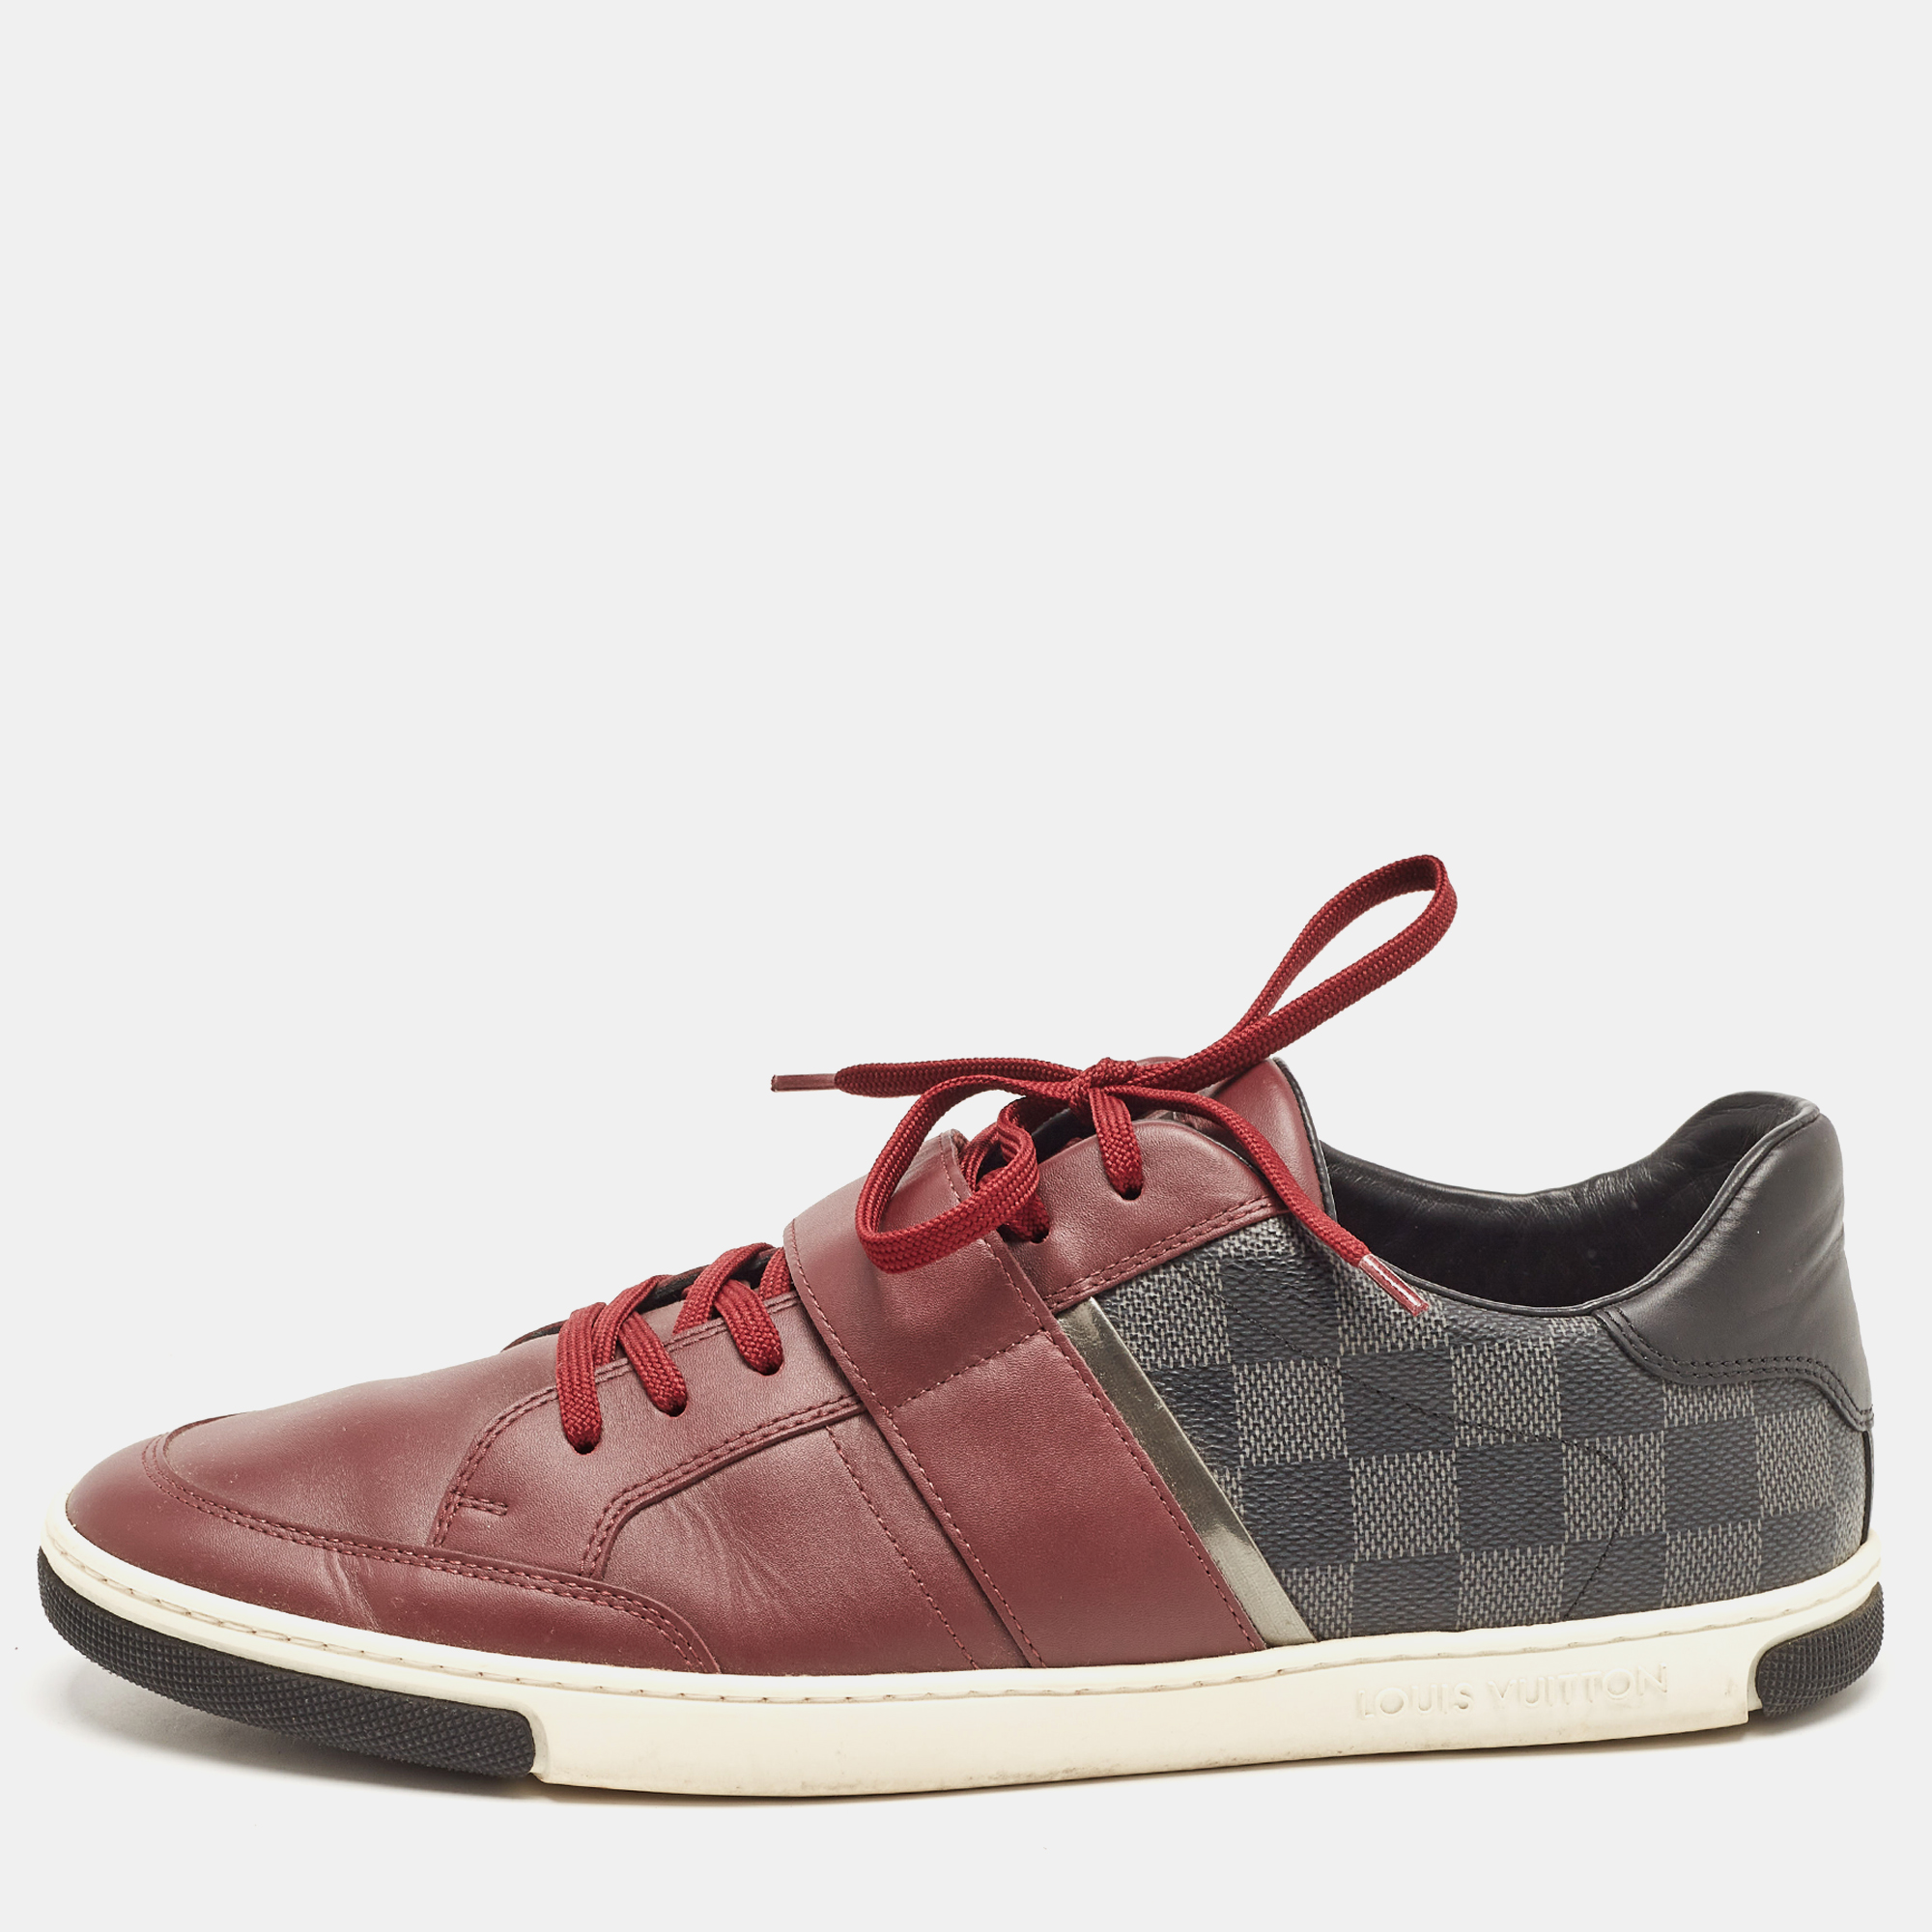 

Louis Vuitton Two Tone Damier Ebene Fabric and Leather Sneakers Size, Burgundy